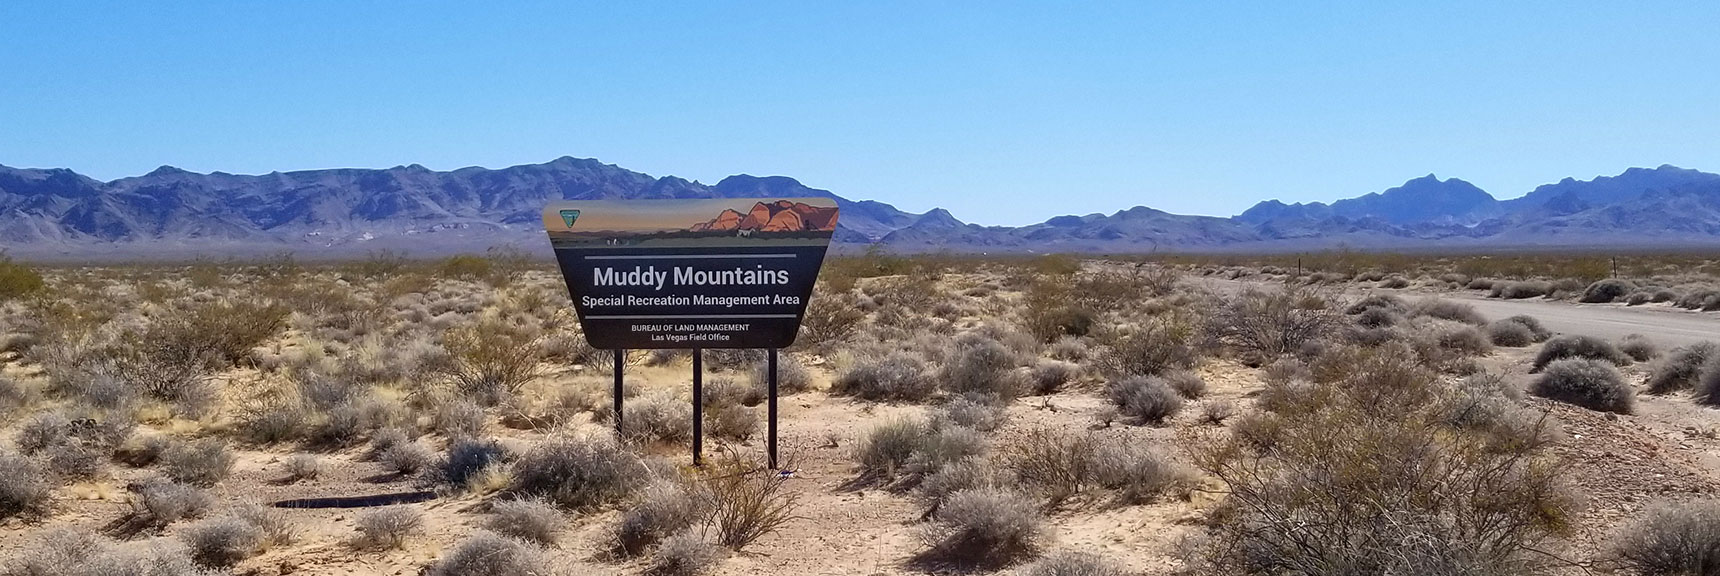 Entrance Sign | Muddy Mountains Wilderness, Nevada